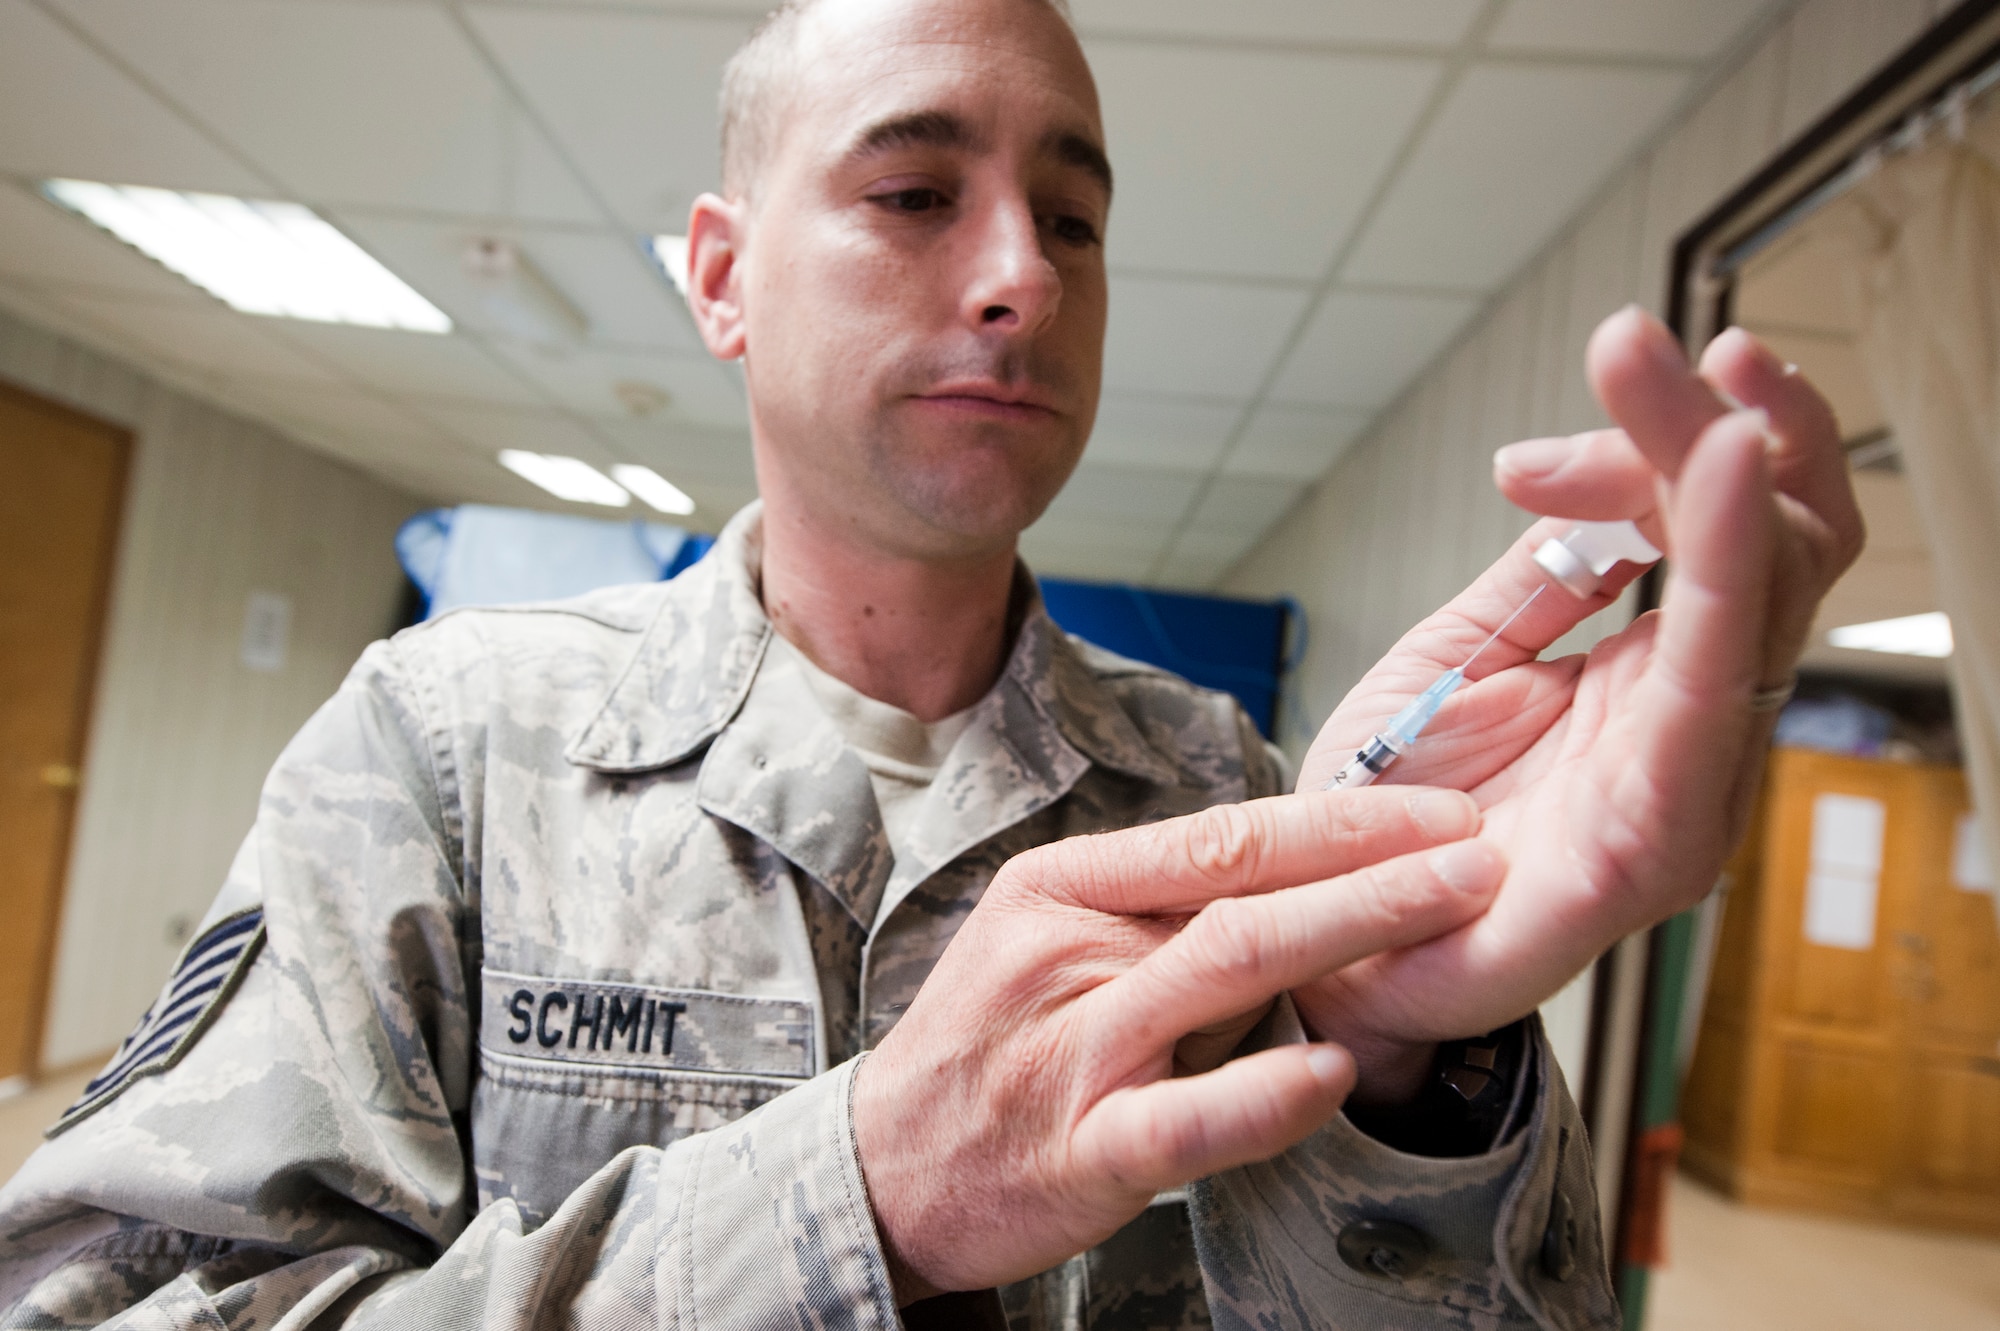 Tech. Sgt. Brian Schmit, 332nd Expeditionary Medical Group medical technician, prepares a needle prior to giving a patient an immunization shot, in an undisclosed location in Southwest Asia, Jan 19, 2012. The base medical clinic is in charge of ensuring all base personnel are up to date on their immunizations. Schmit is deployed from Spangdahlem Air Base, Germany, and is a native of Rogers Ark. (U.S. Air Force photo by Staff Sgt. Joshua J. Garcia/Released)